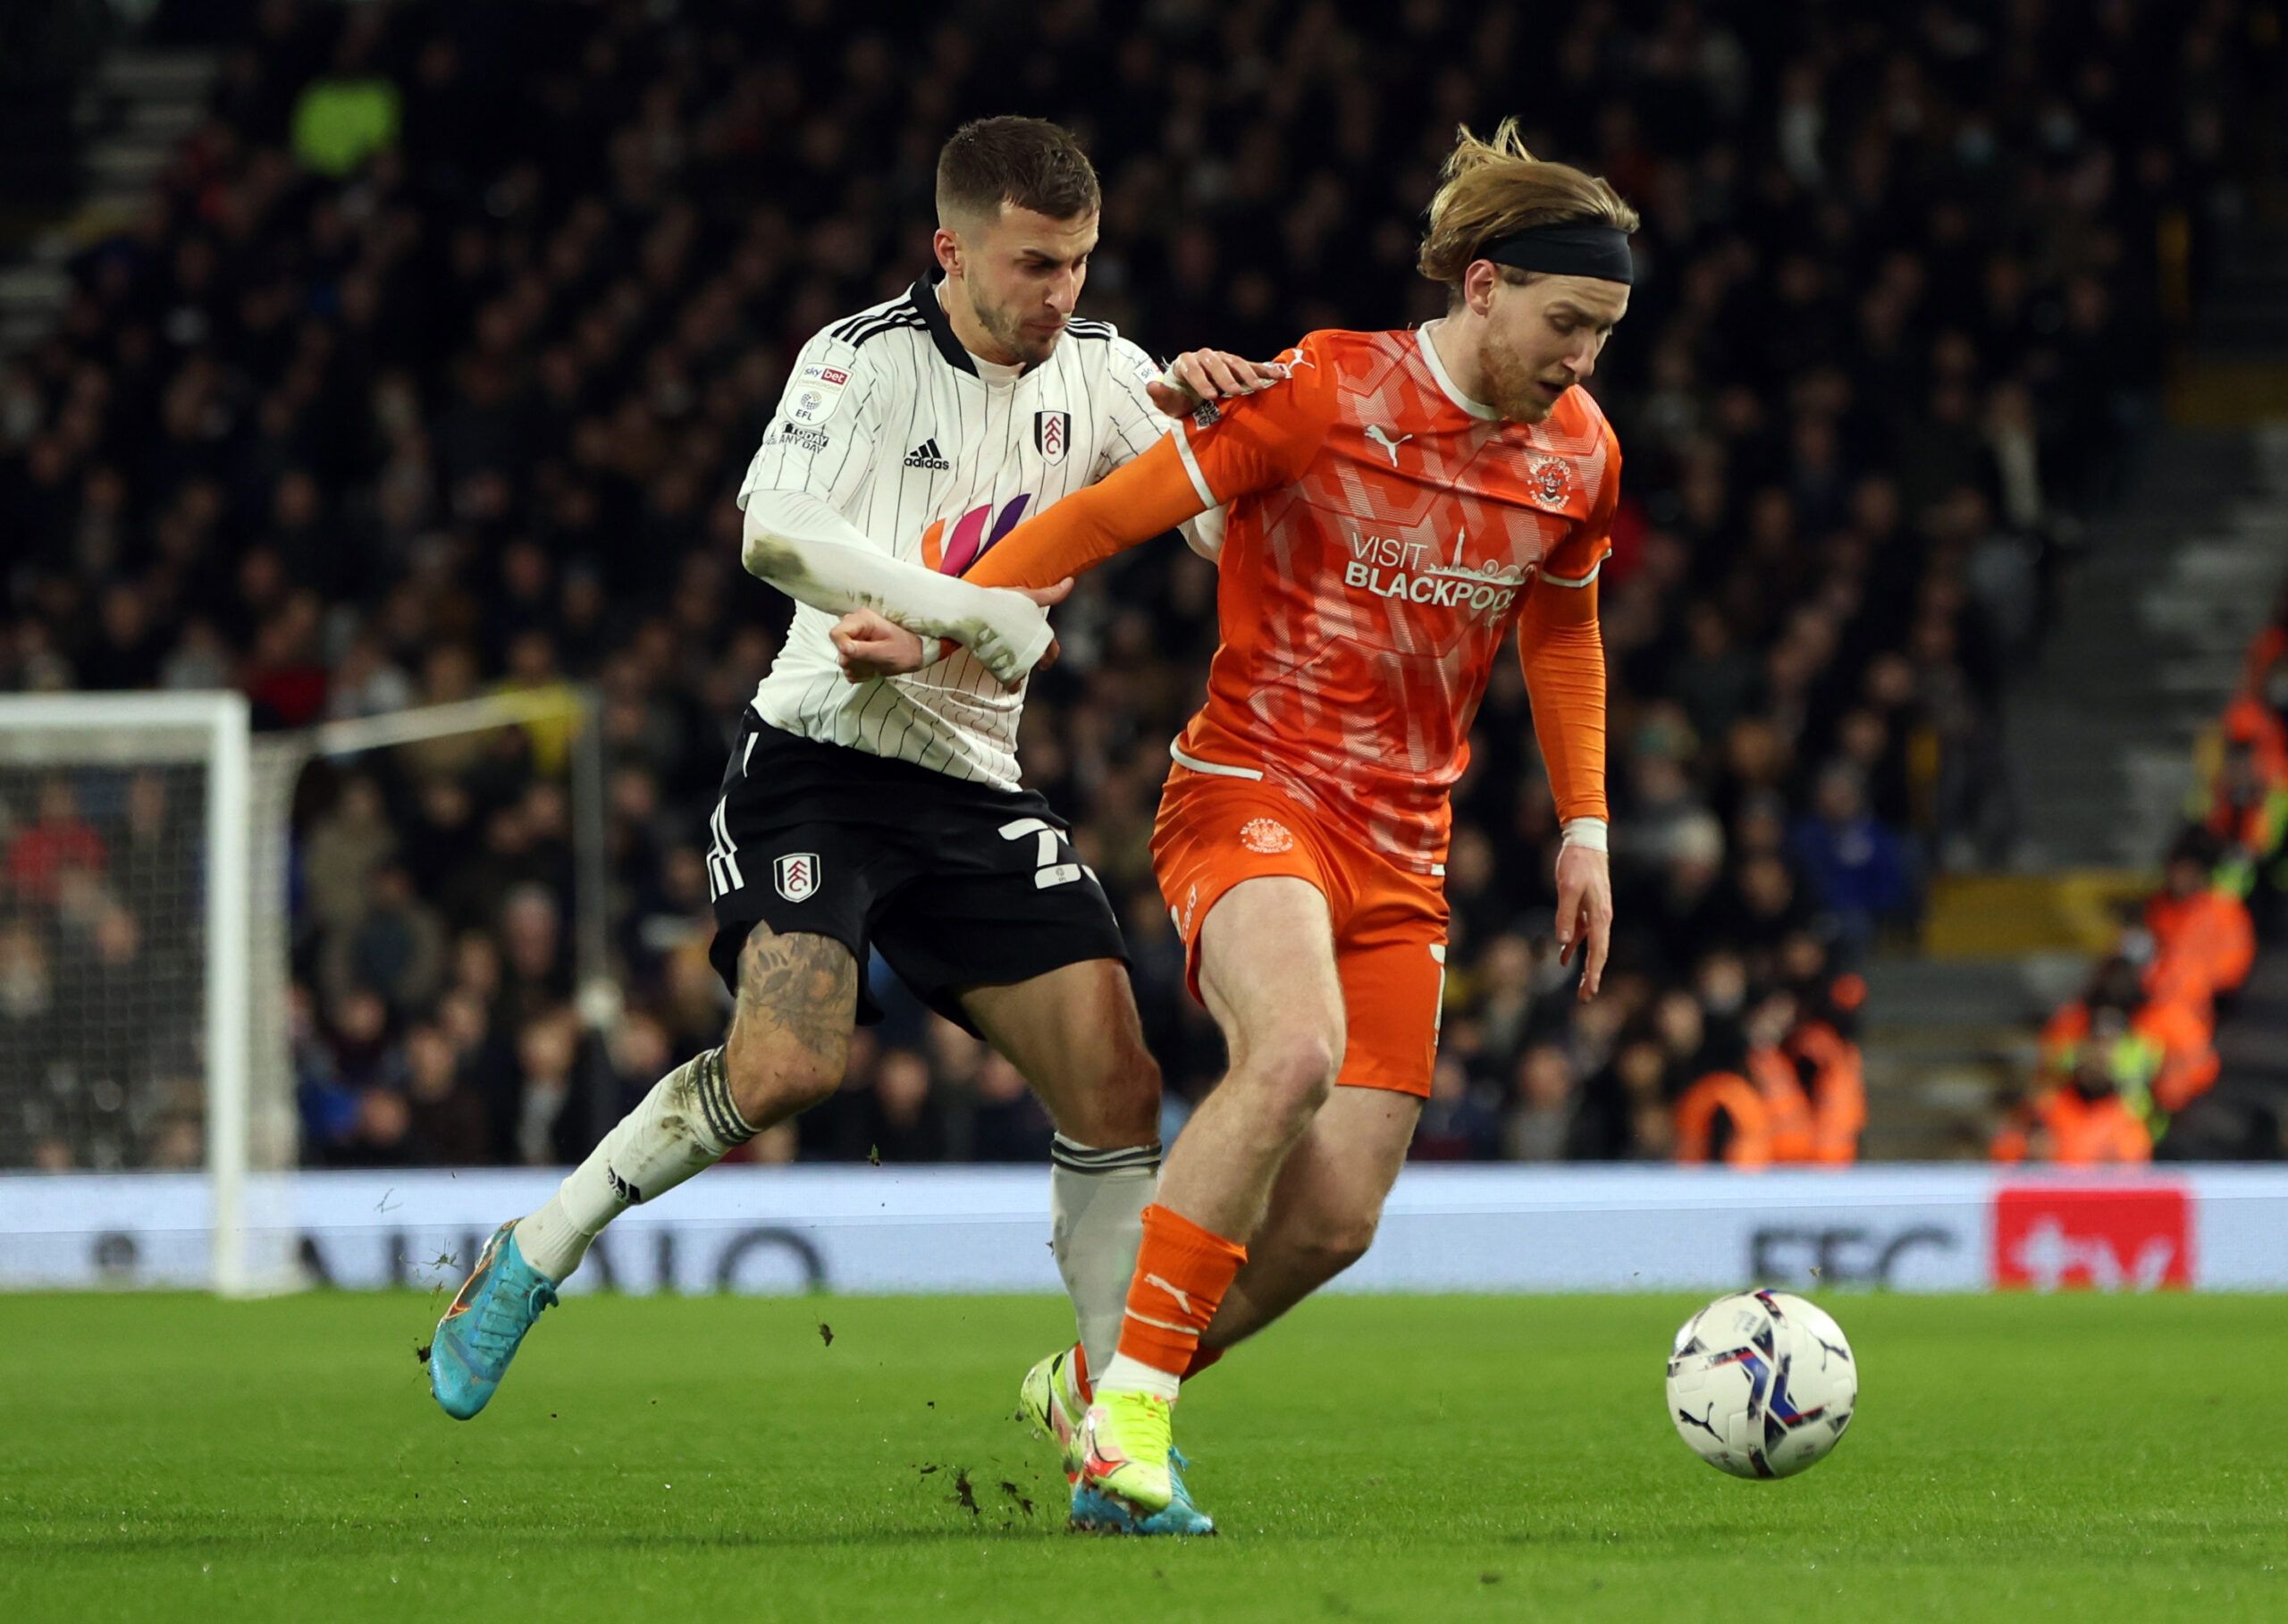 Soccer Football - Championship - Fulham v Blackpool - Craven Cottage, London, Britain - January 29, 2022 Fulham's Joe Bryan in action with Blackpool's Josh Bowler Action Images/Paul Childs EDITORIAL USE ONLY. No use with unauthorized audio, video, data, fixture lists, club/league logos or 'live' services. Online in-match use limited to 75 images, no video emulation. No use in betting, games or single club /league/player publications.  Please contact your account representative for further detail